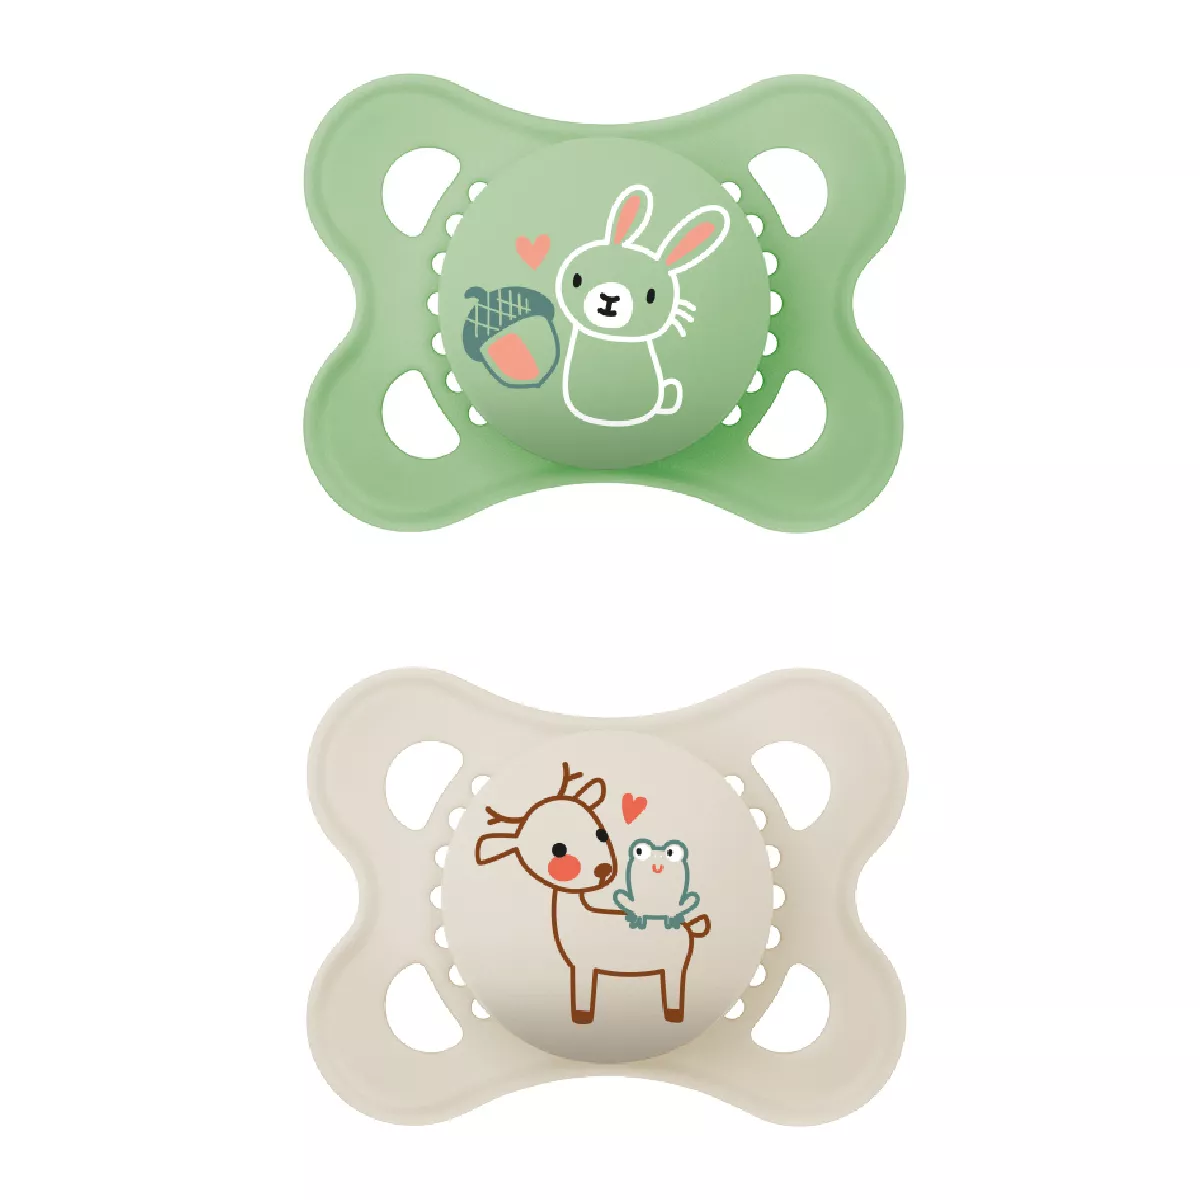 MAM Original Pure Soother 2-6 months, set of 2